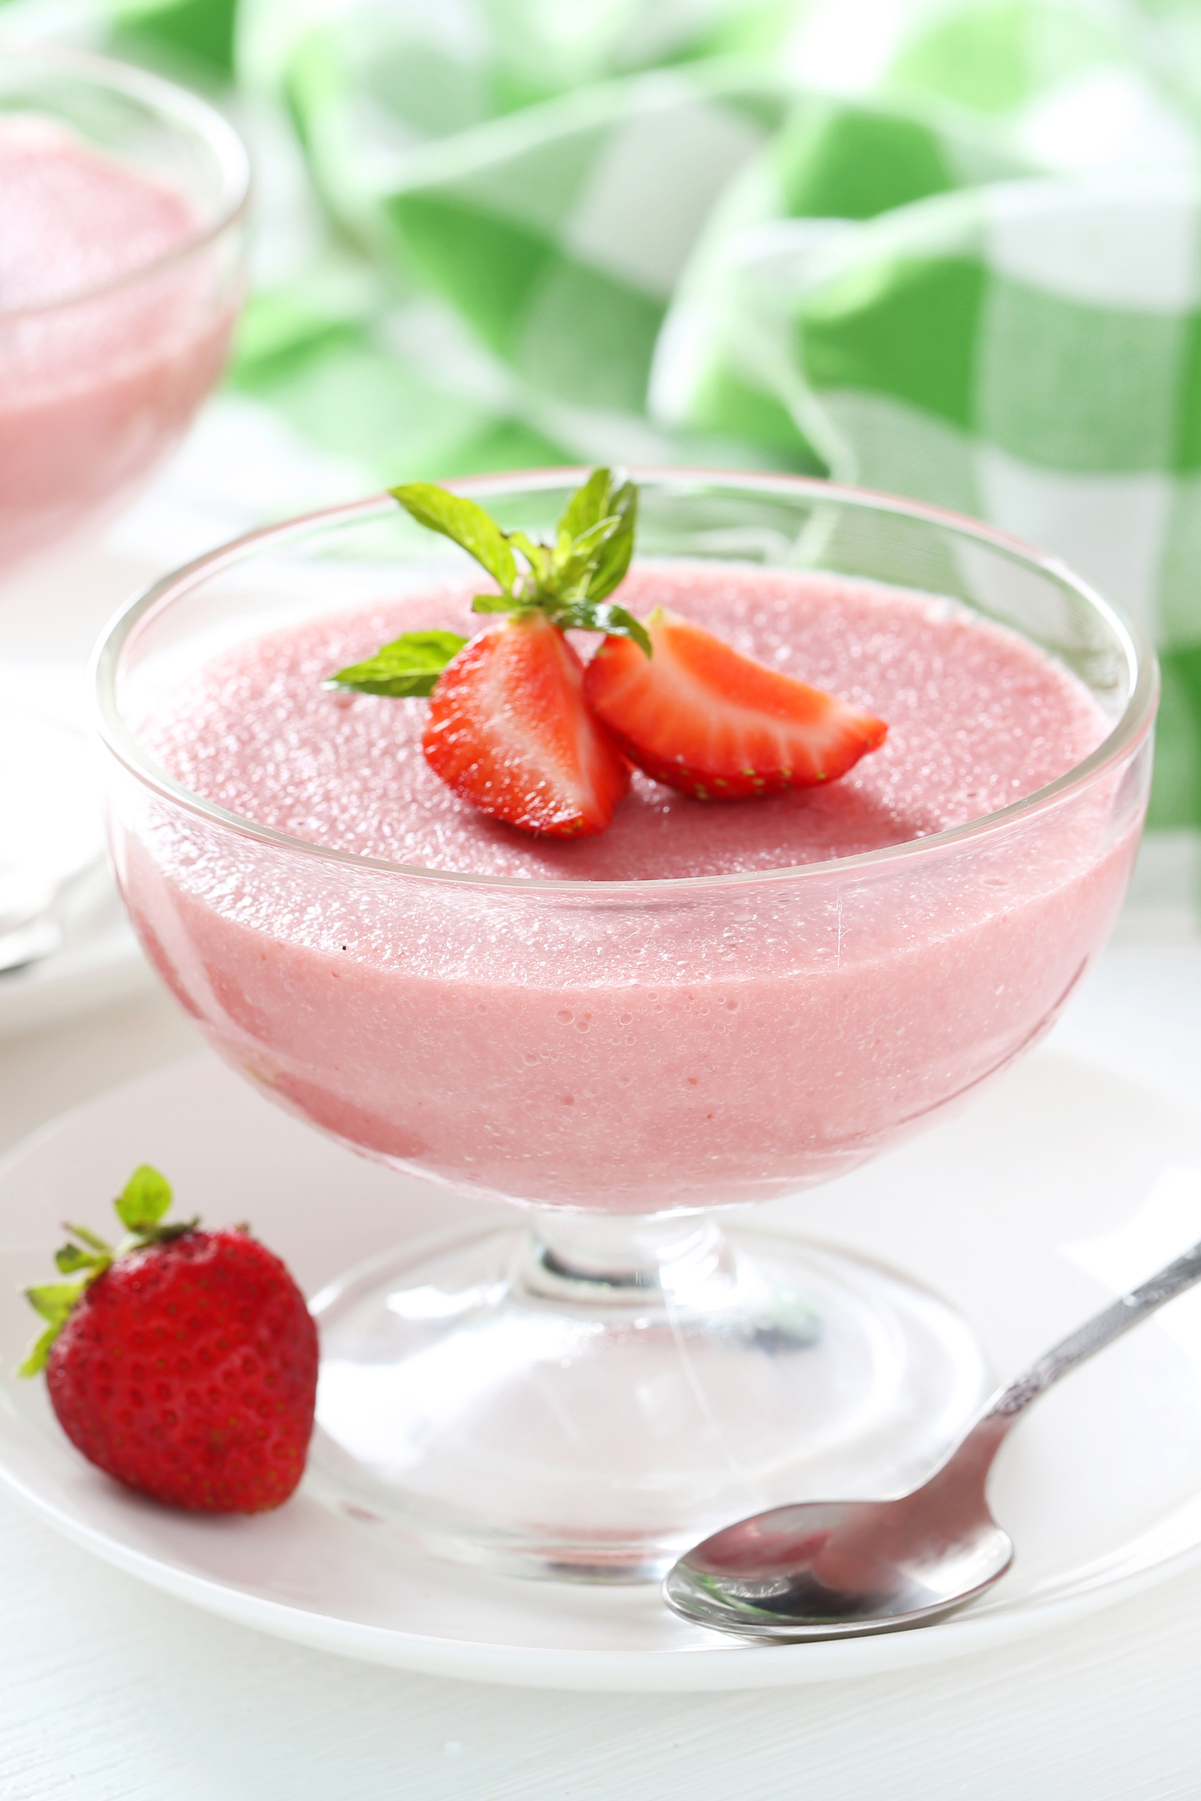 Simple Strawberry Cream Cheese Mousse (Weight Watchers) Recipe in a clear glass footed dish with fresh strawberries on top and around it.